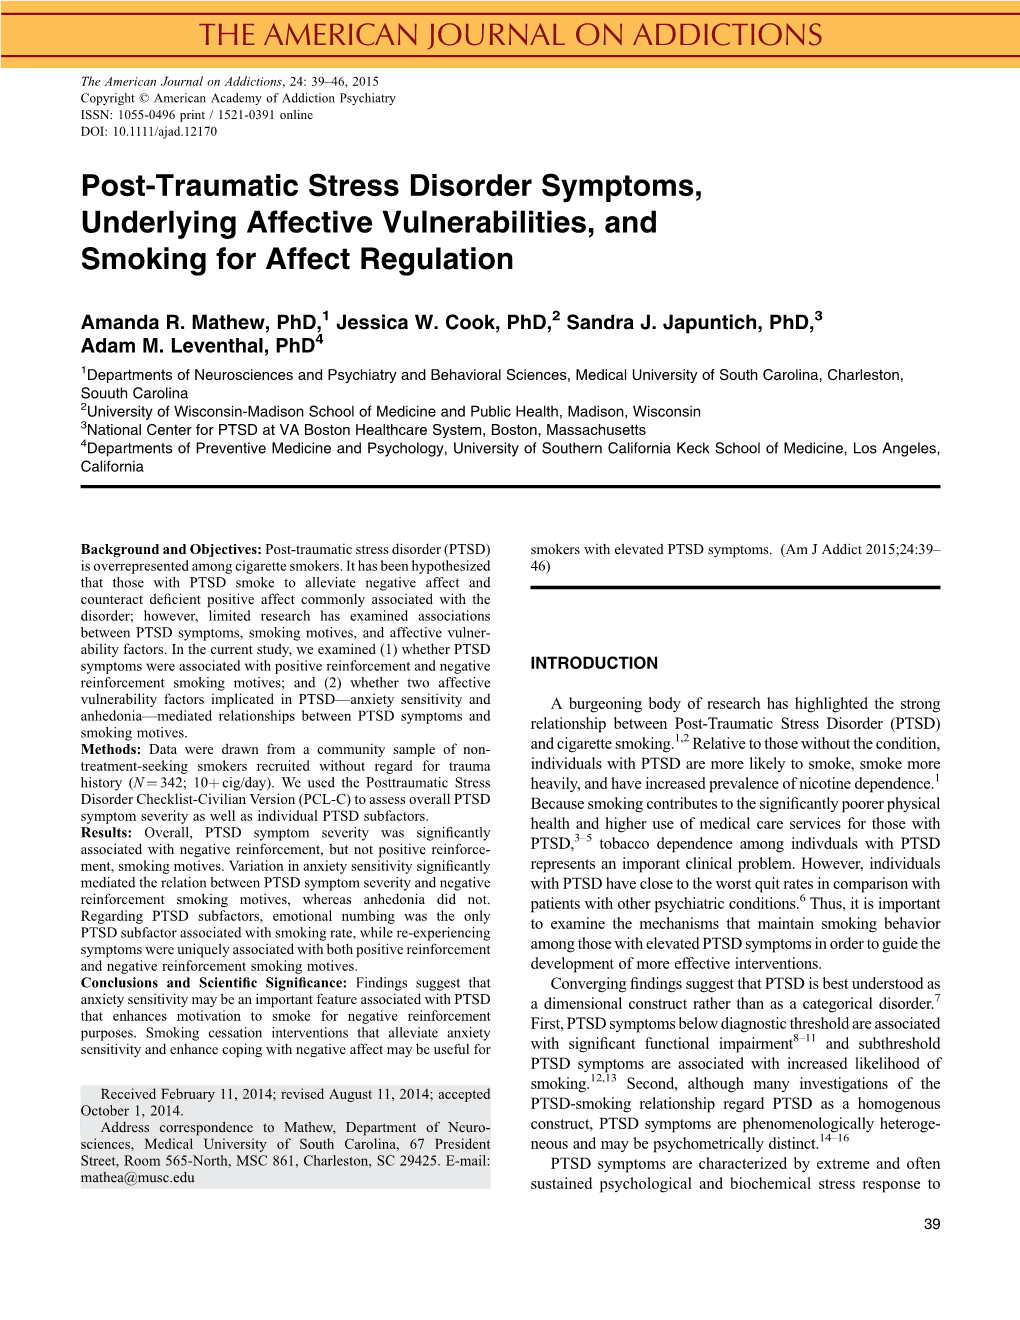 Post-Traumatic Stress Disorder Symptoms, Underlying Affective Vulnerabilities, and Smoking for Affect Regulation